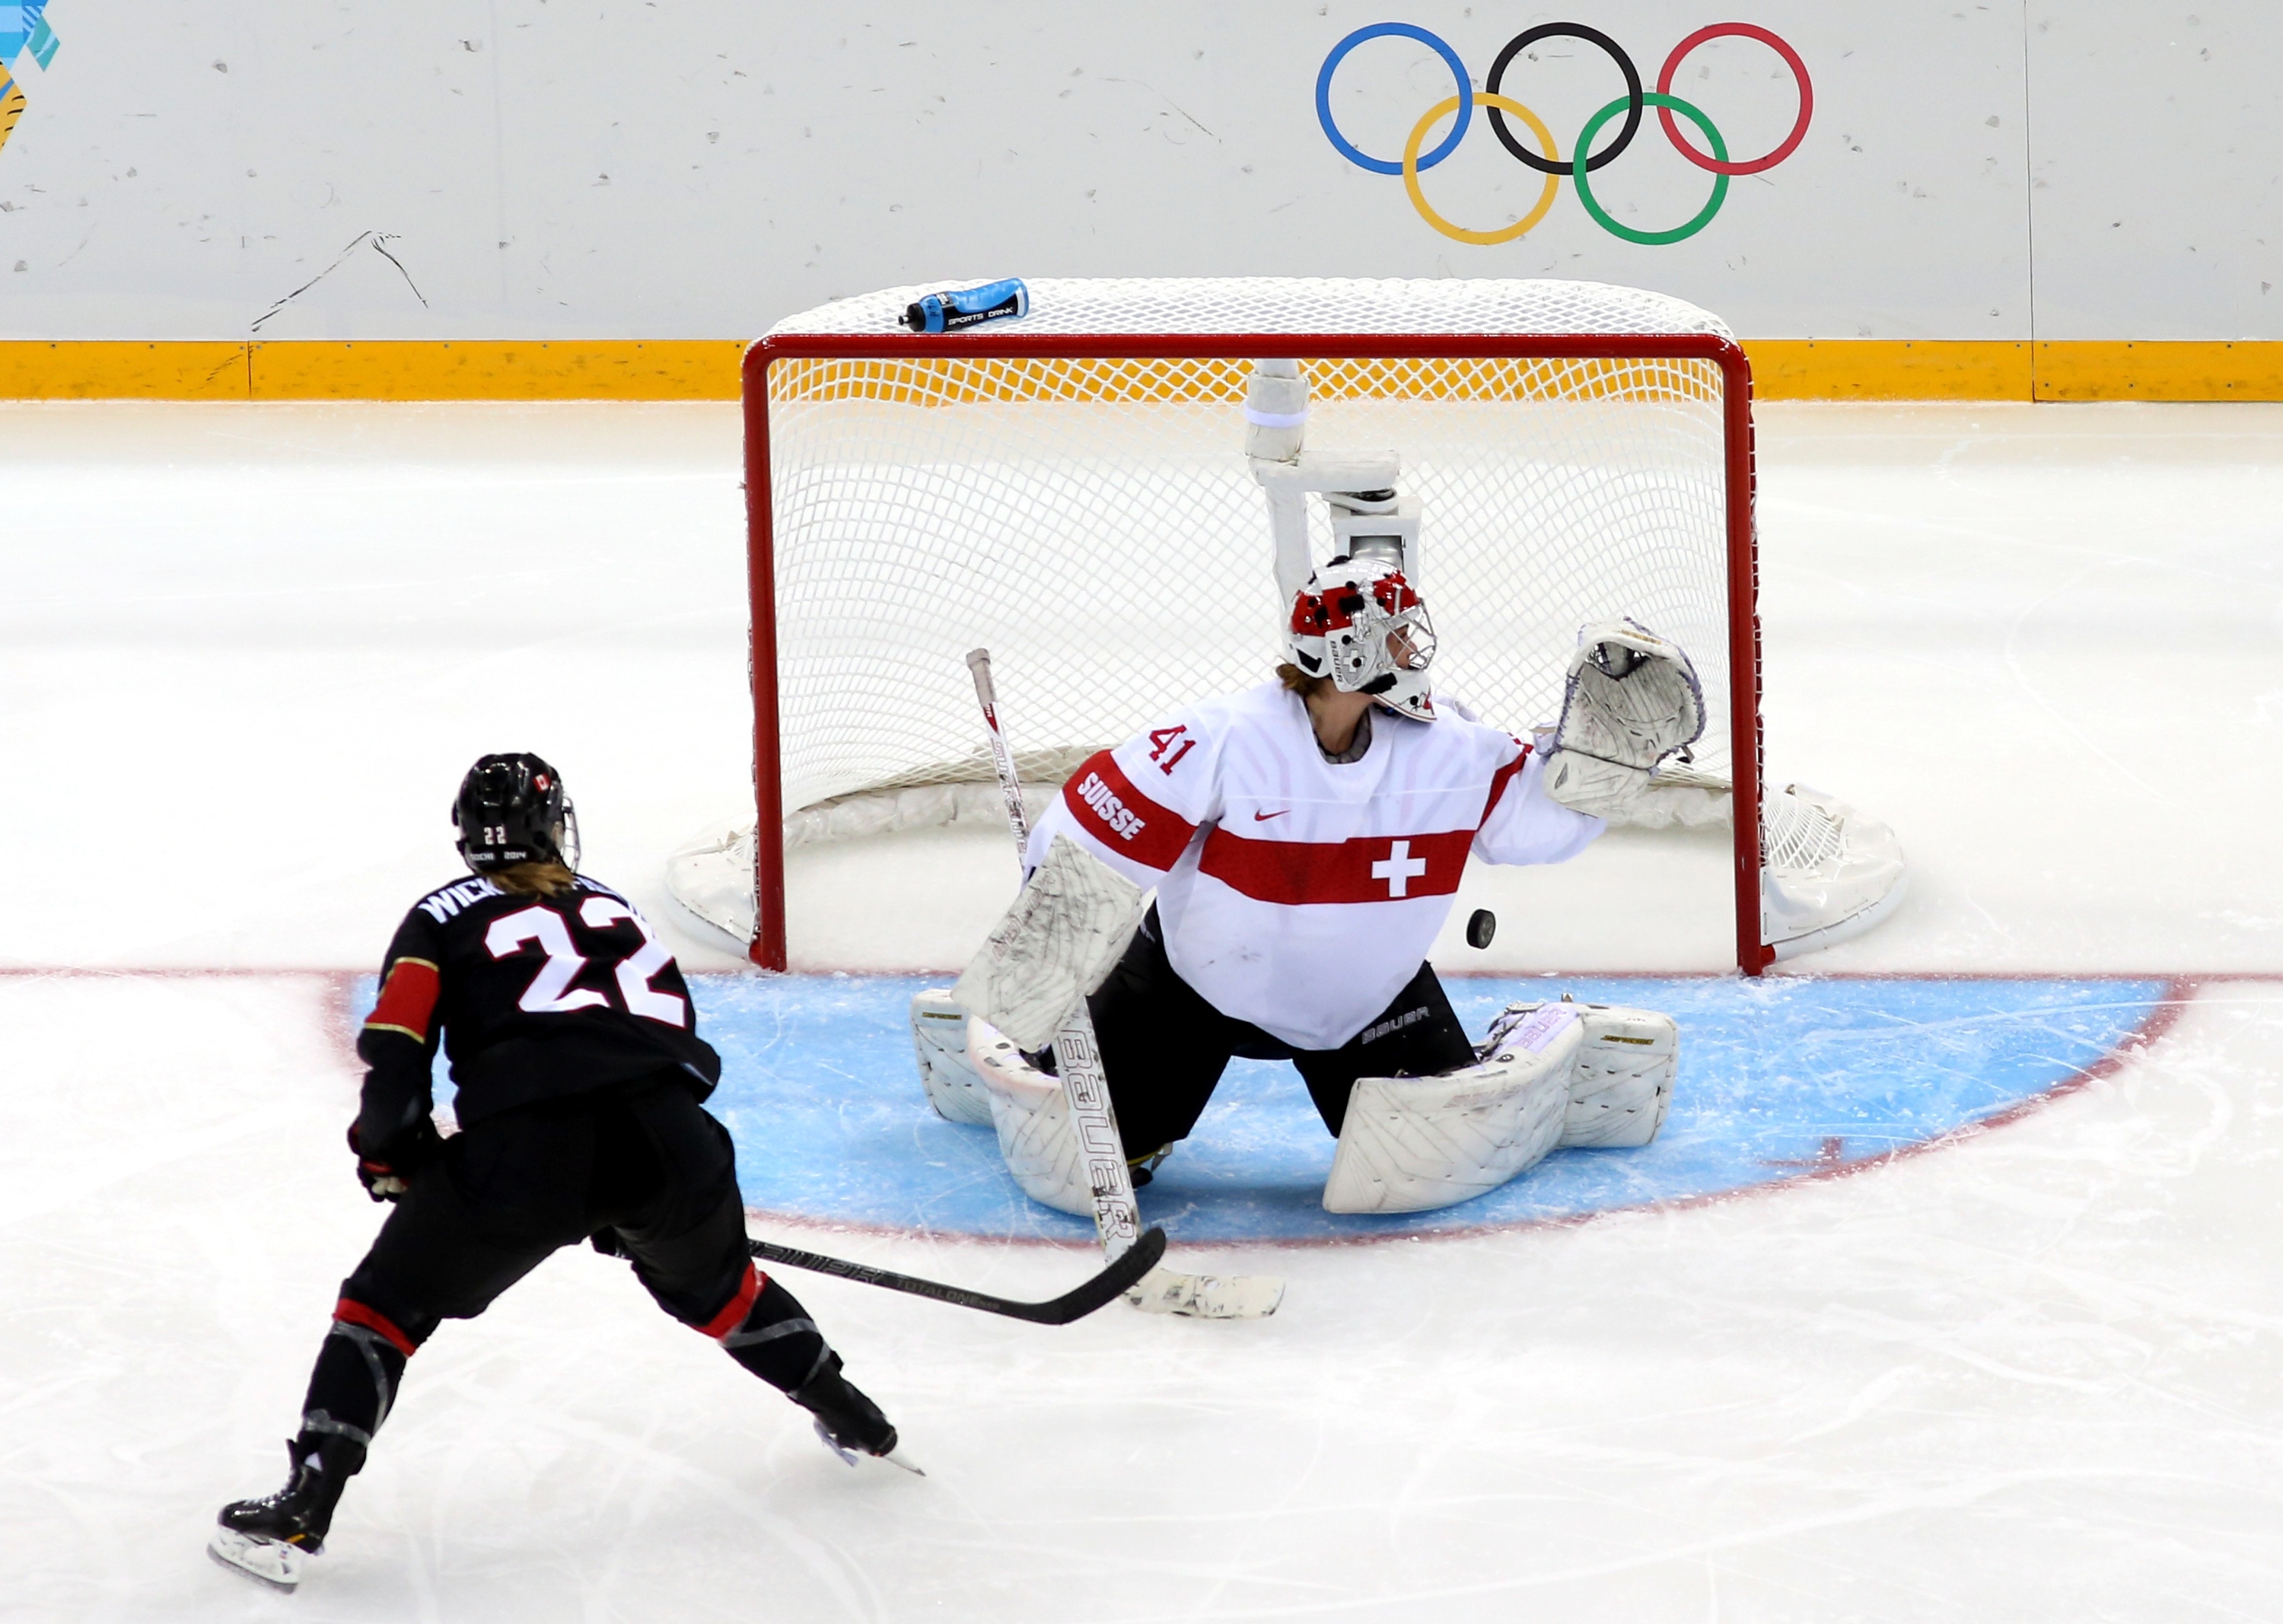 Swiss Ice Hockey At The Olympic Games In Sochi Wallpaper